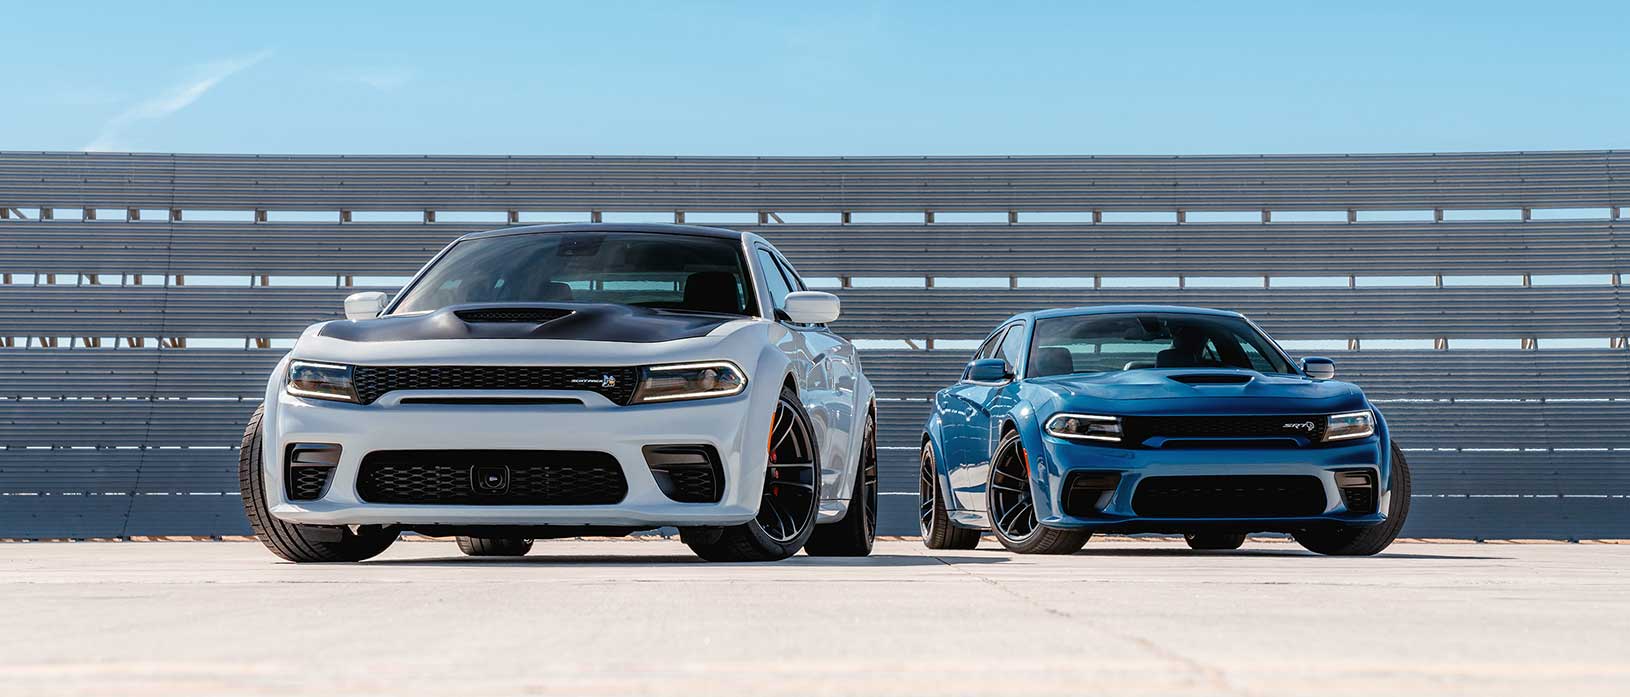 Dodge Announces Pricing for 2020 Dodge Charger Lineup, Including New Charger SRT<sup>®</sup> Hellcat Widebody